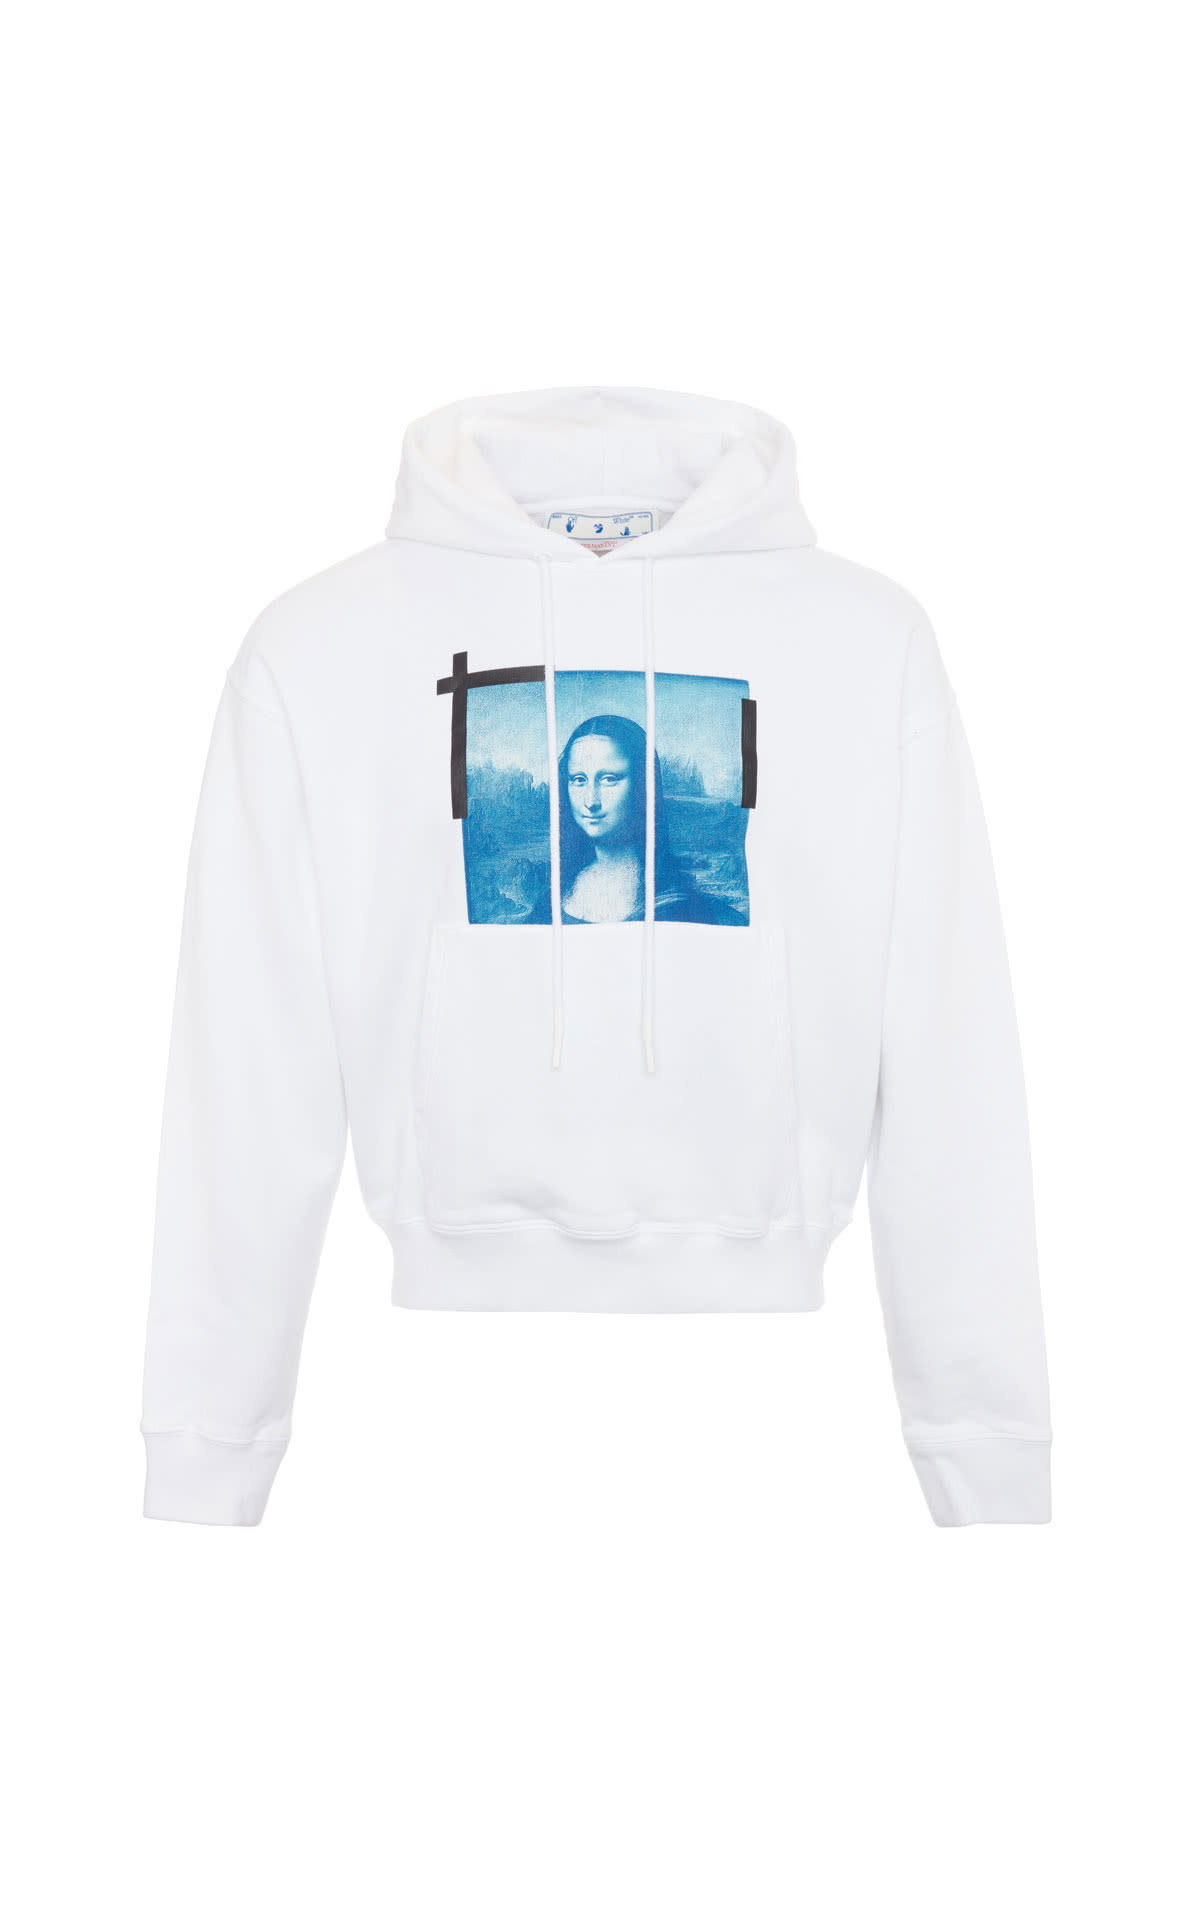 OFF-WHITE Monalisa over hoodie white blue from Bicester Village